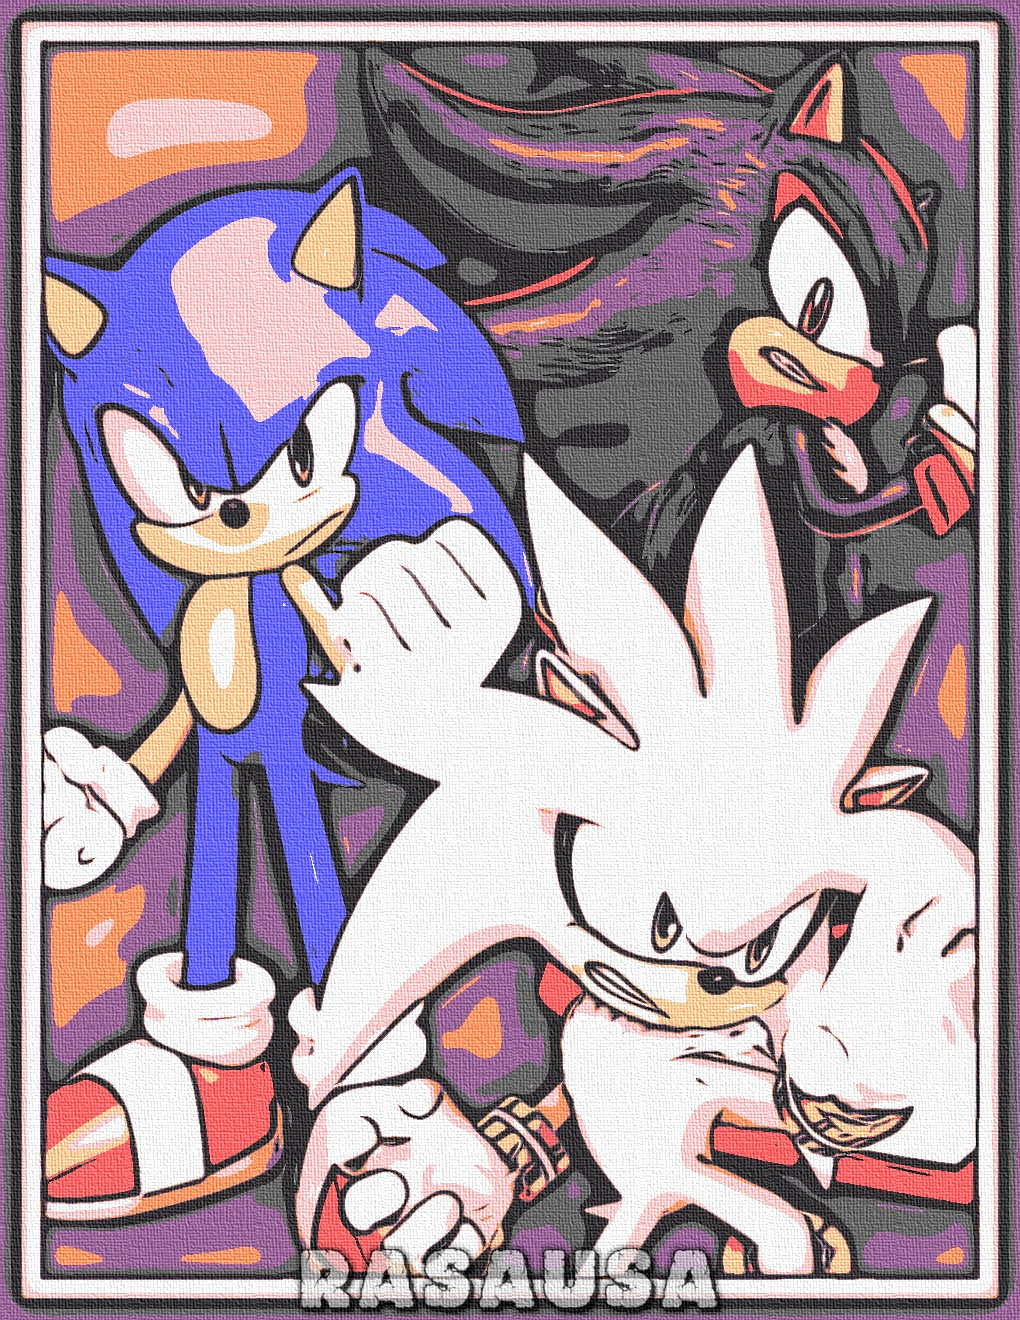 Sonic, Shadow, and Silver ^^ by XxAngelinaHedgehogxX on DeviantArt